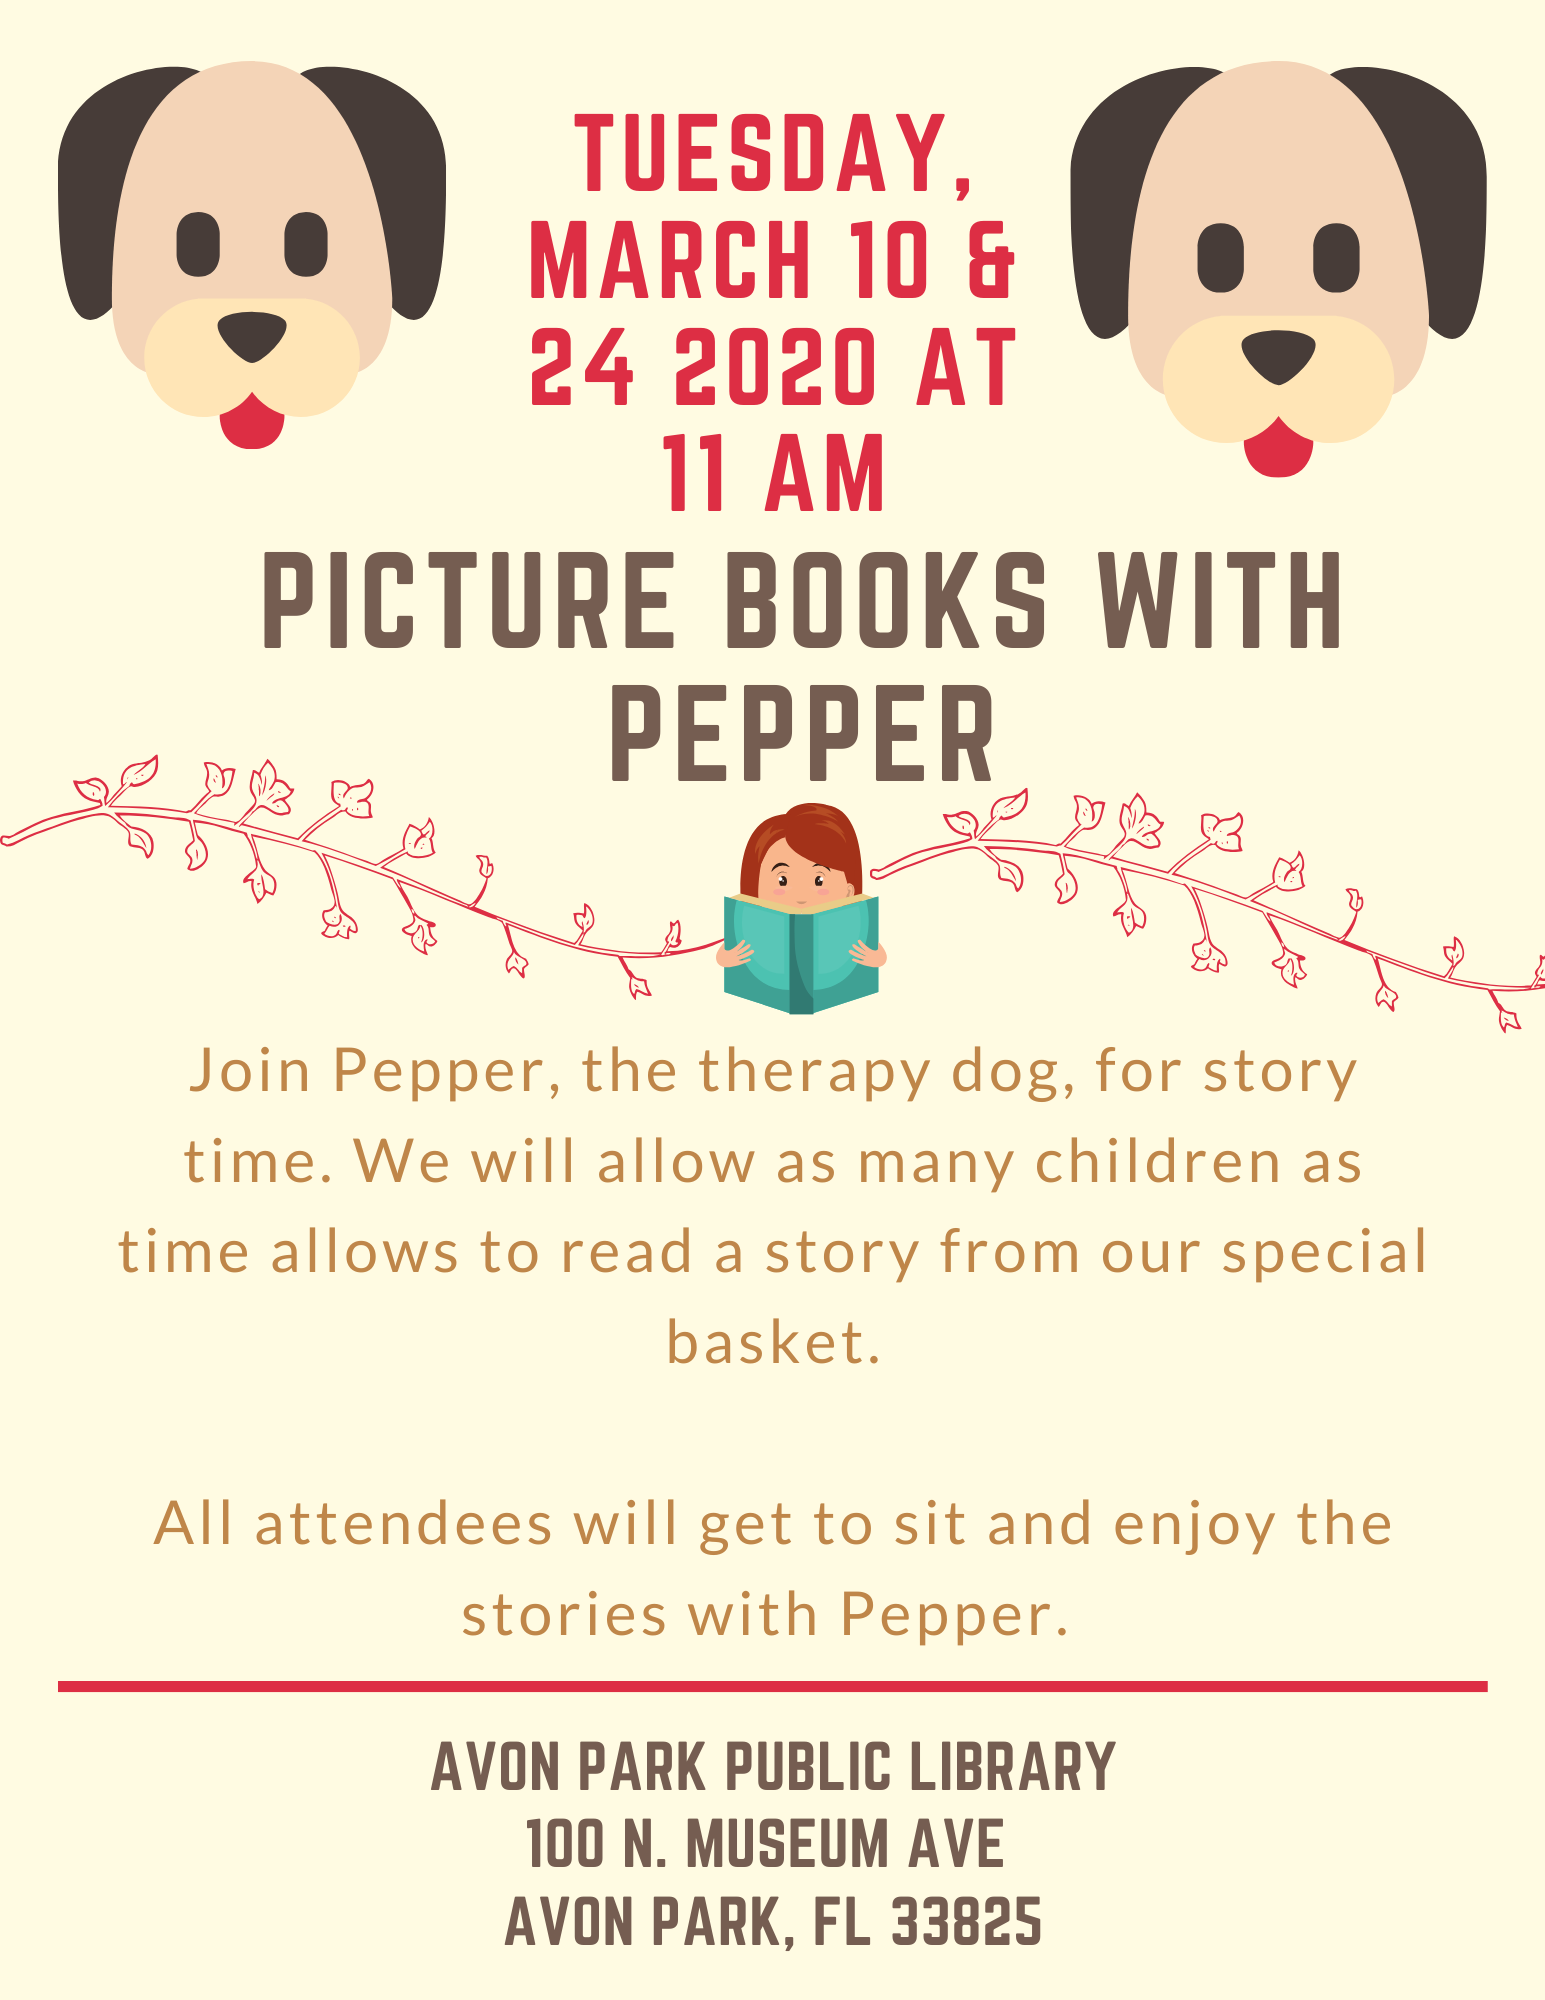 Read to Pepper, trained therapy dog in our Picture Books with Pepper on March 10 & 24 at 11:00 AM at the Avon Park Public Library!